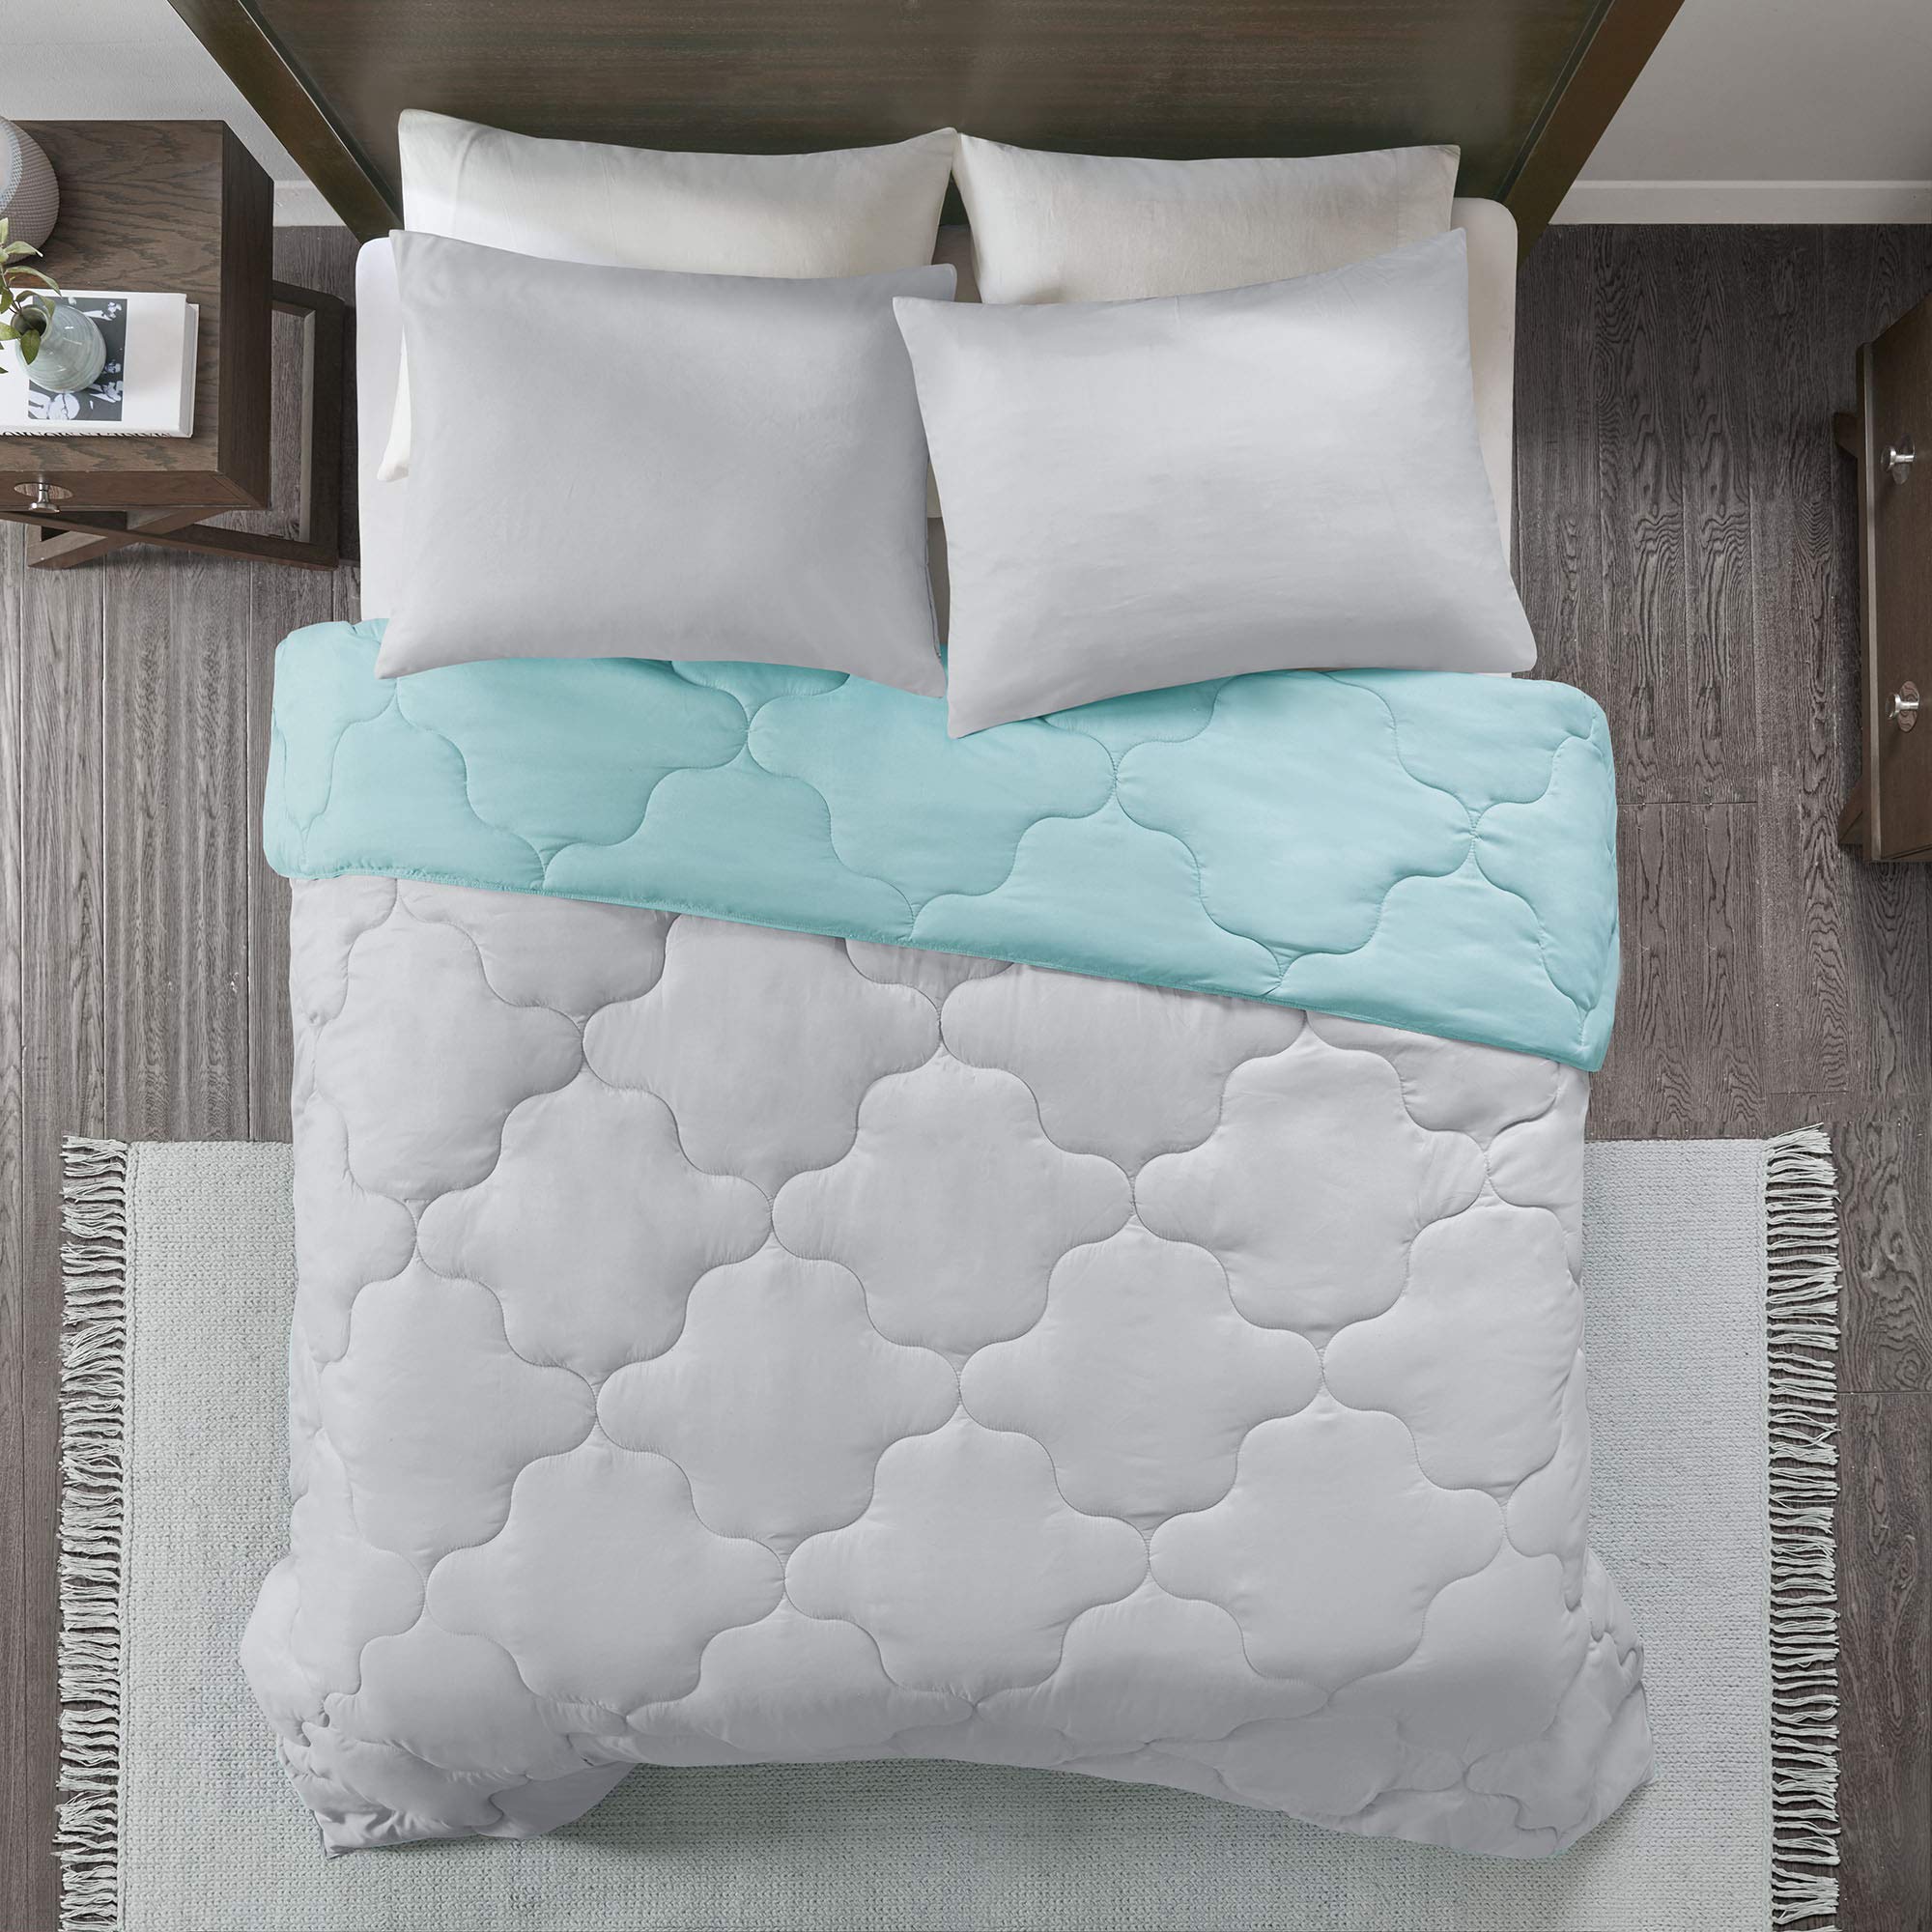 Comfort Spaces Vixie Reversible Comforter Set - Trendy Casual Geometric Quilted Cover, All Season Down Alternative Cozy Bedding, Matching Sham, Aqua/Gray, Twin/Twin XL 2 piece